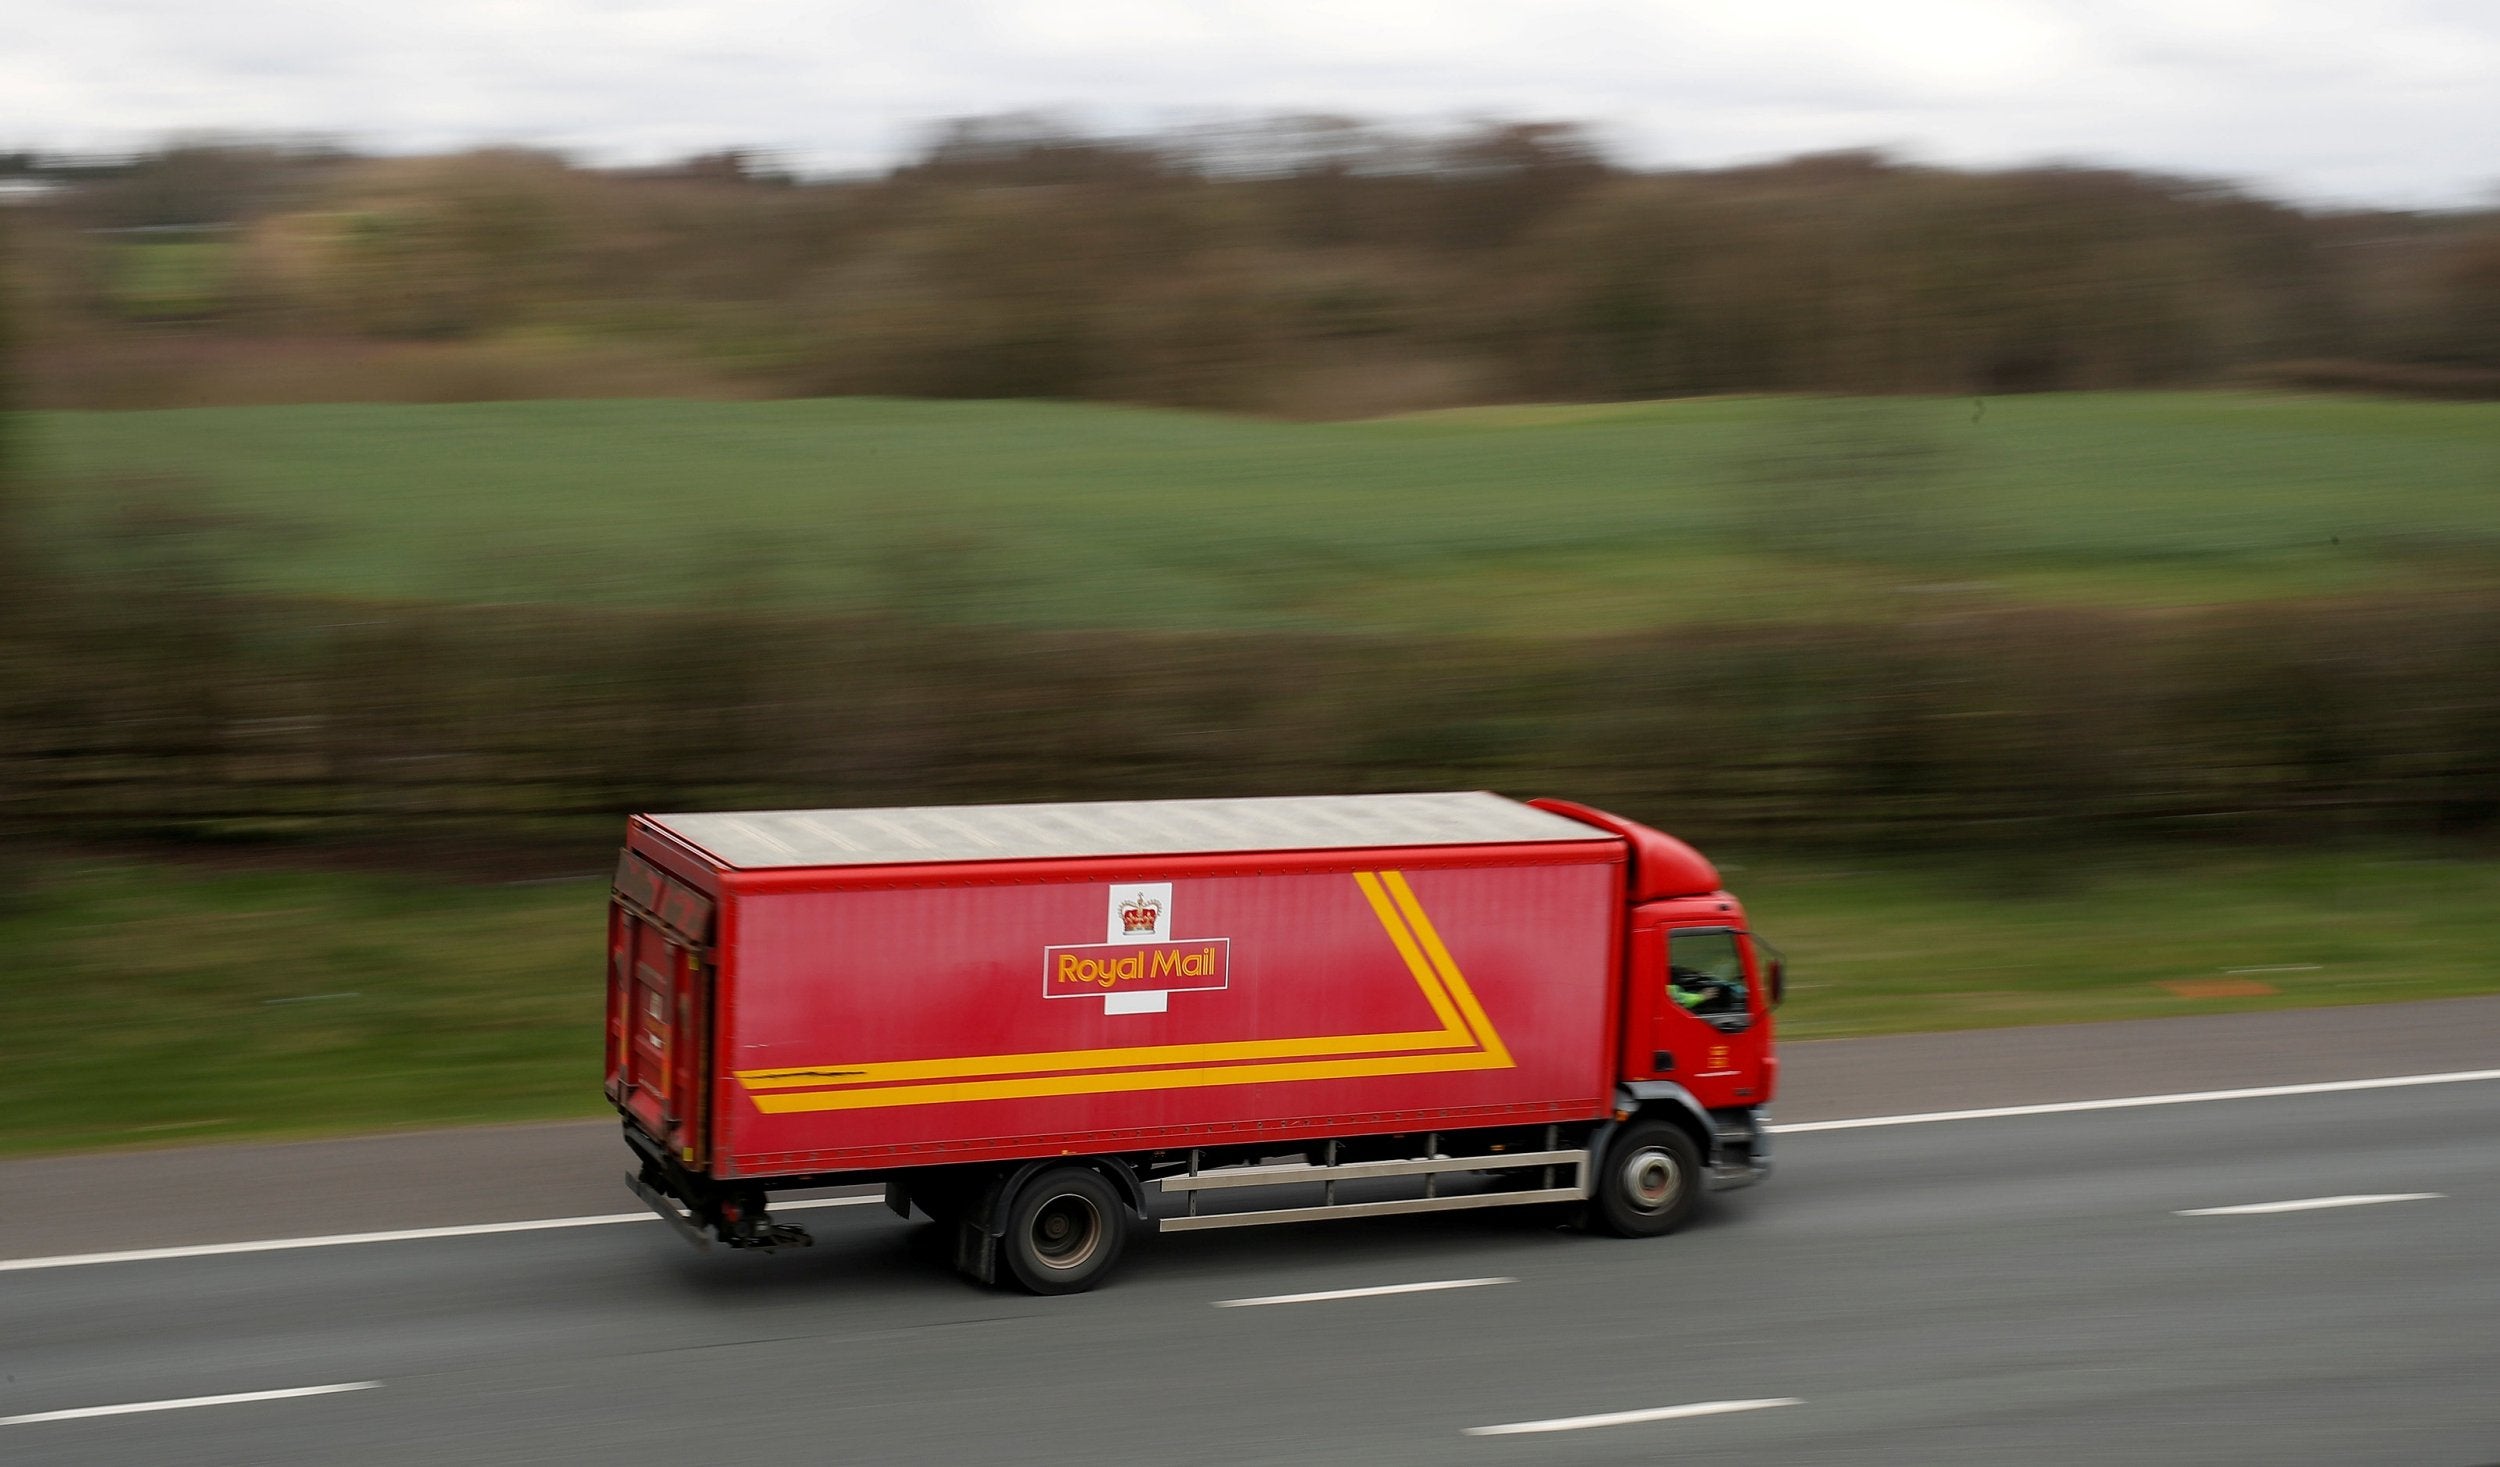 A Royal Mail truck on the move. But the company's earnings and share price are going backwards